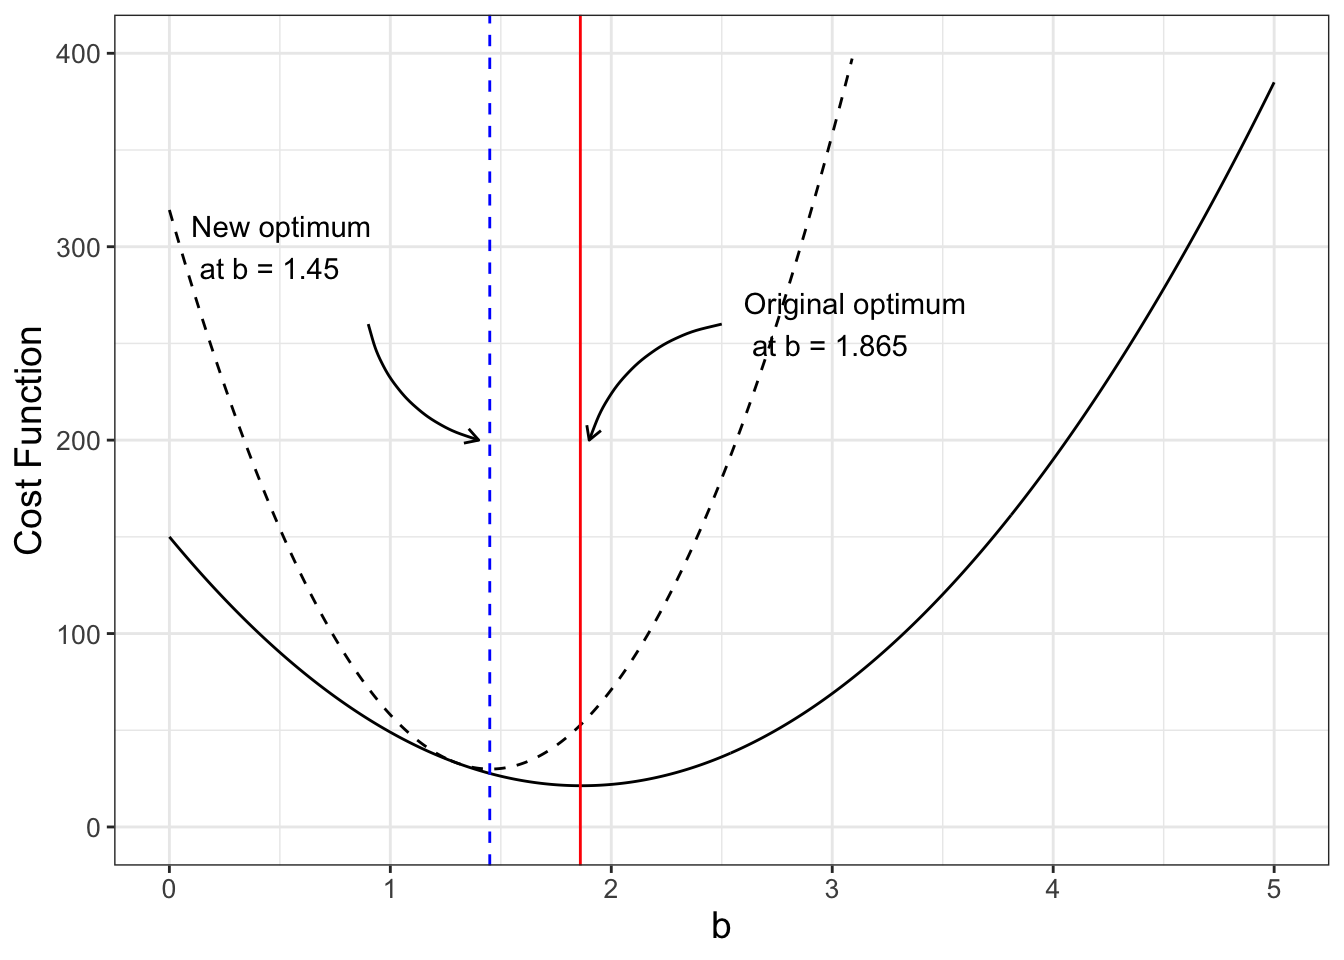 Comparing two cost functions $S(b)$ (black) and $\tilde{S}(b)$ (black dashed line)